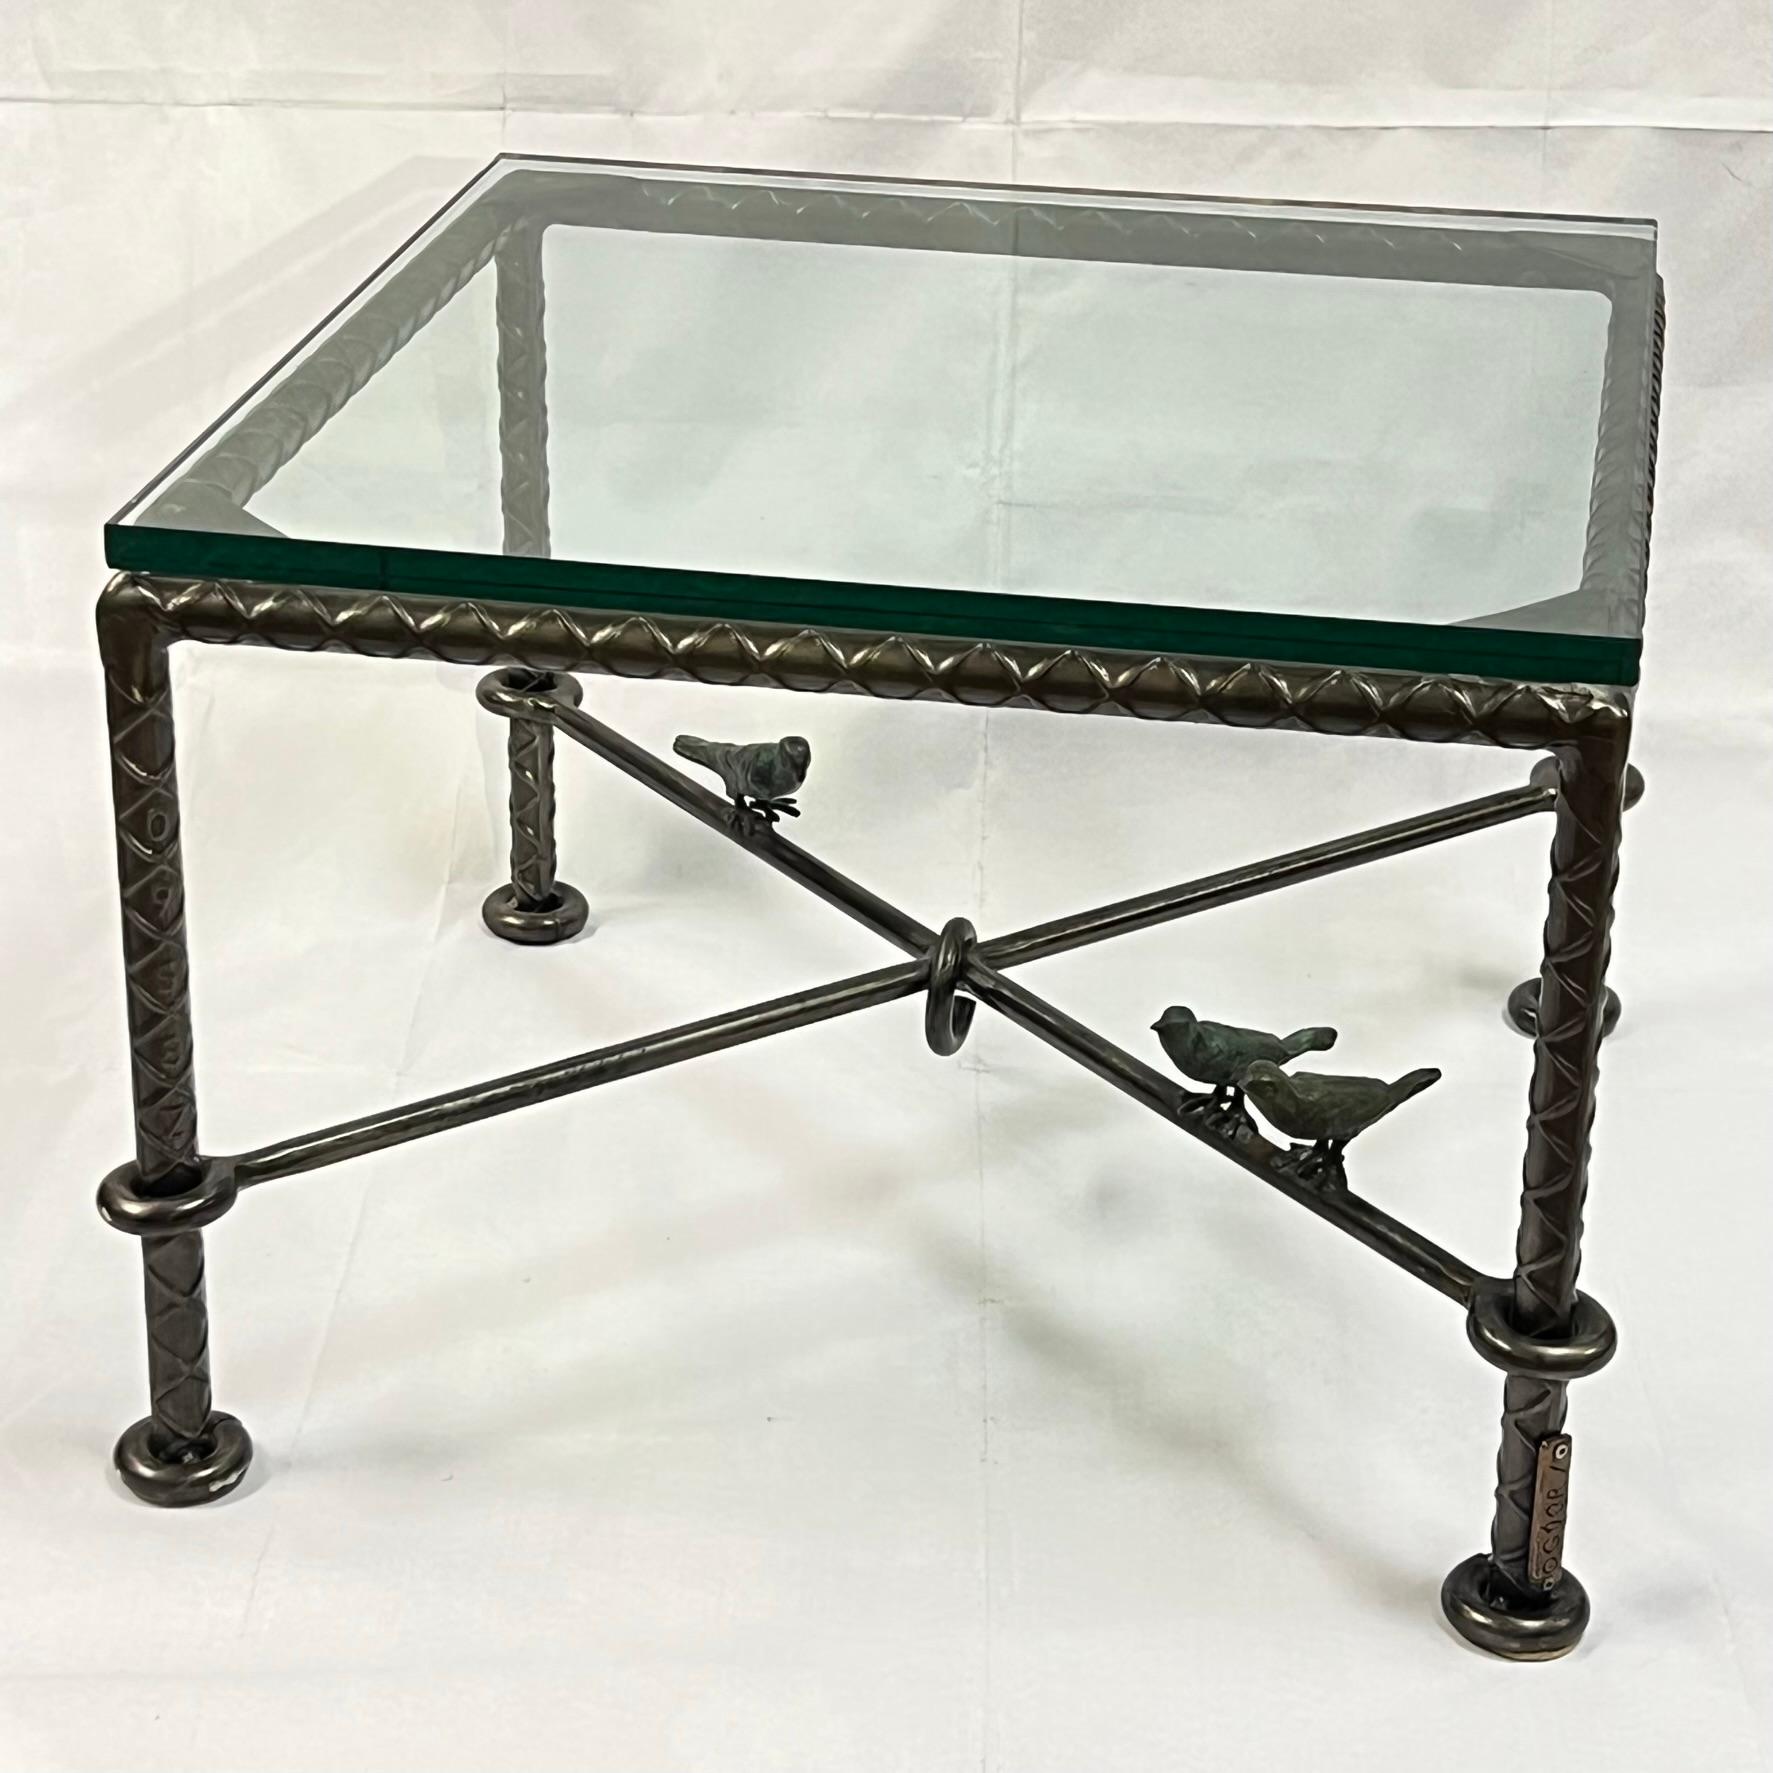 20th Century Pair Steel and Glass Cocktail Tables by Ilana Goor, circa 1985 For Sale